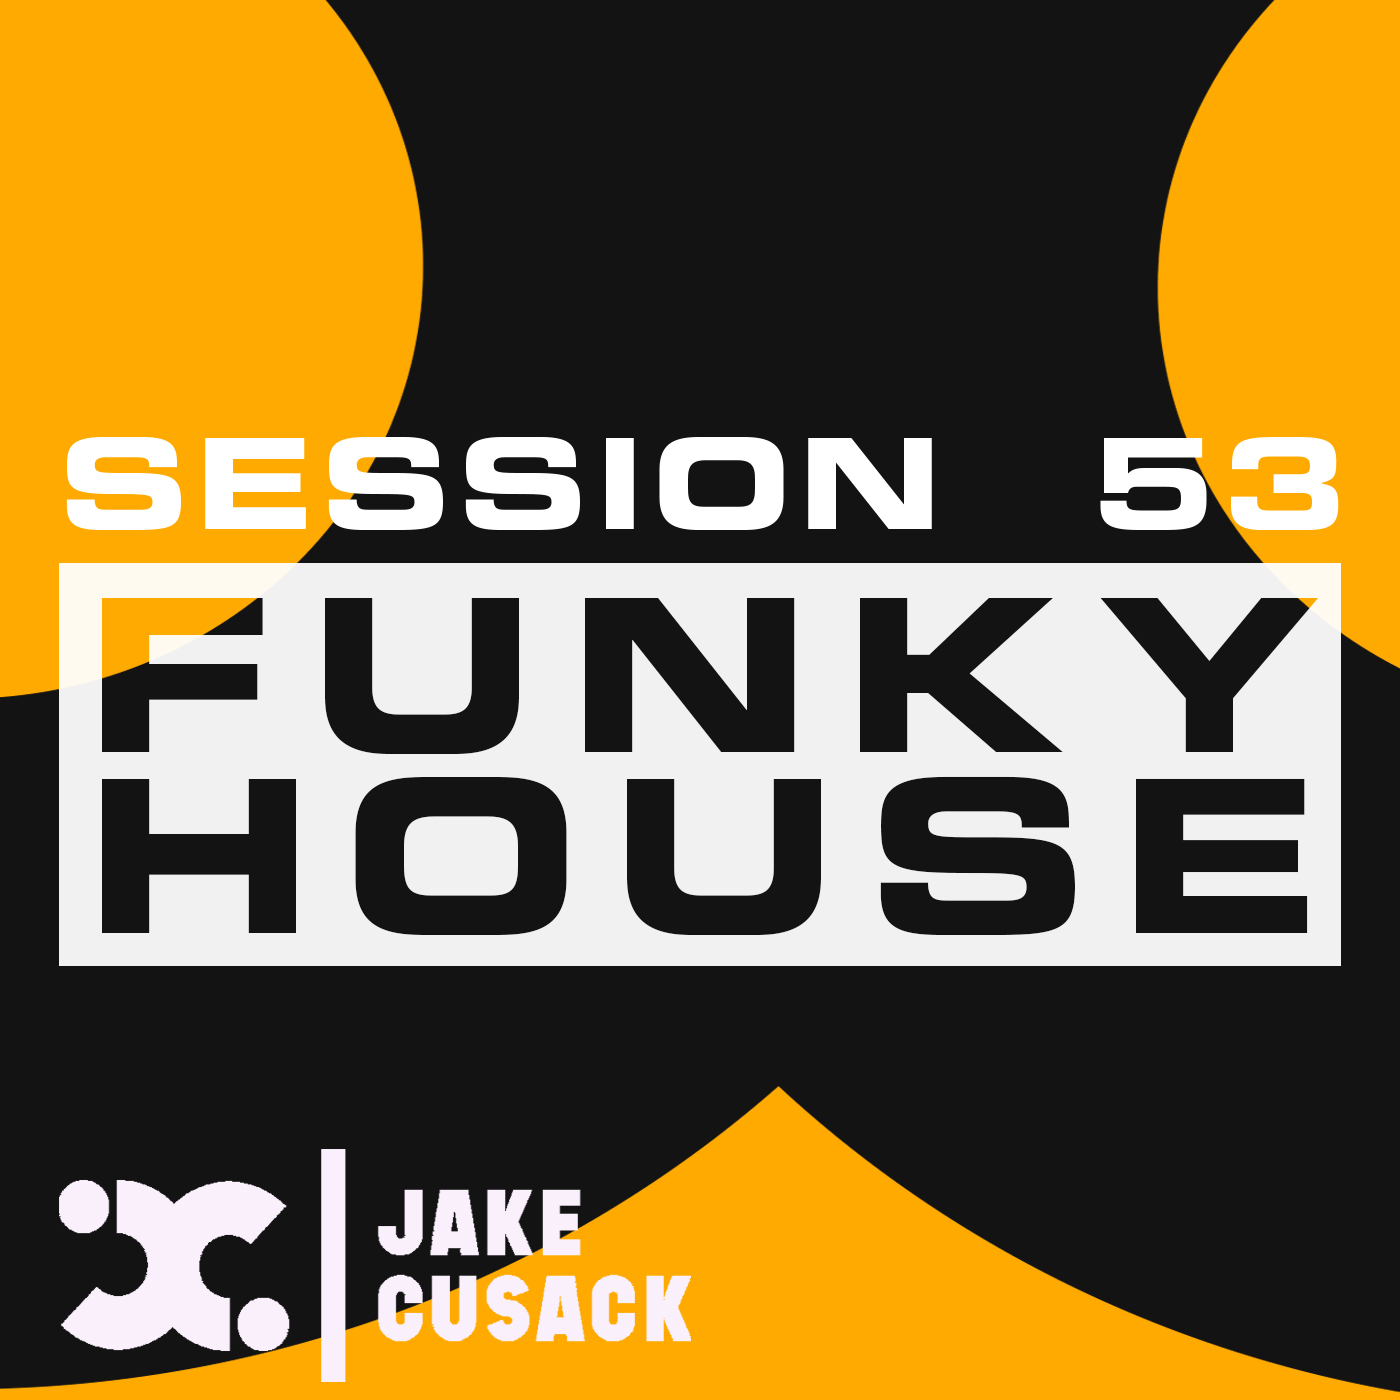 Jake Cusack - Funky House - March - Session 53